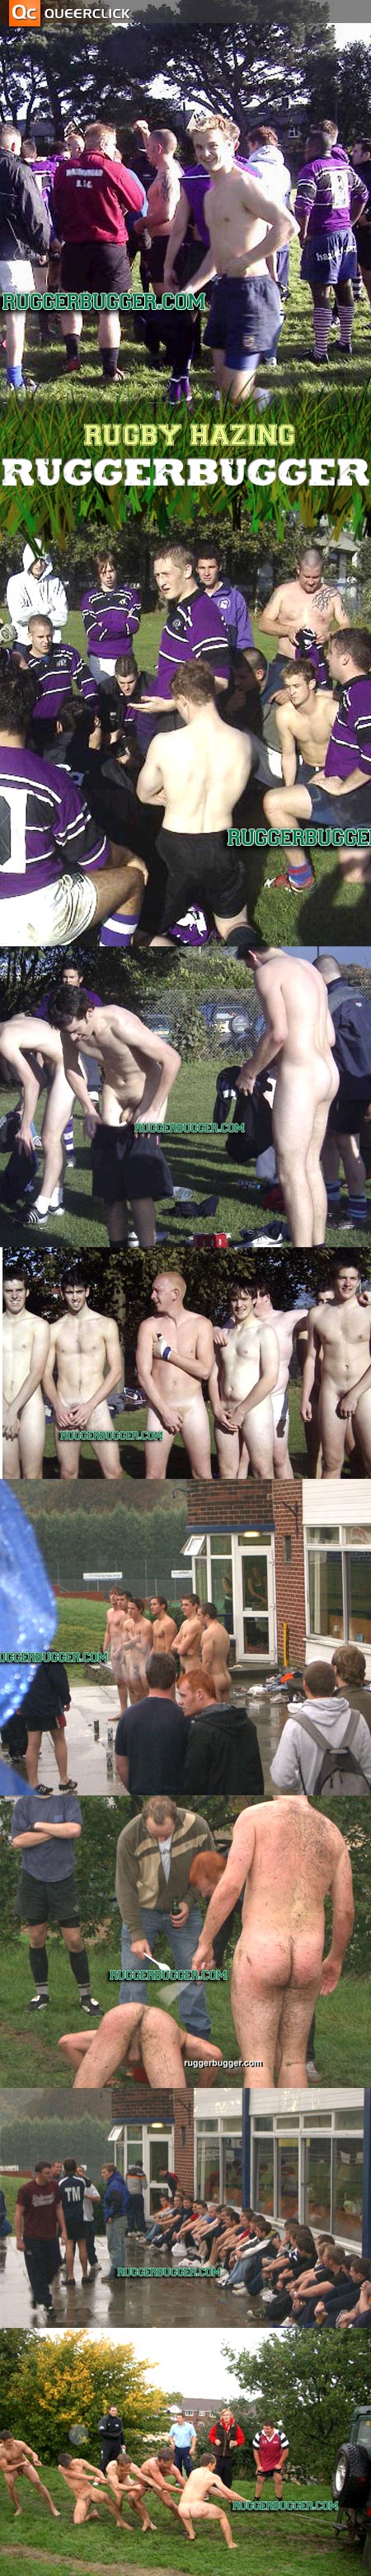 Rugby initiations